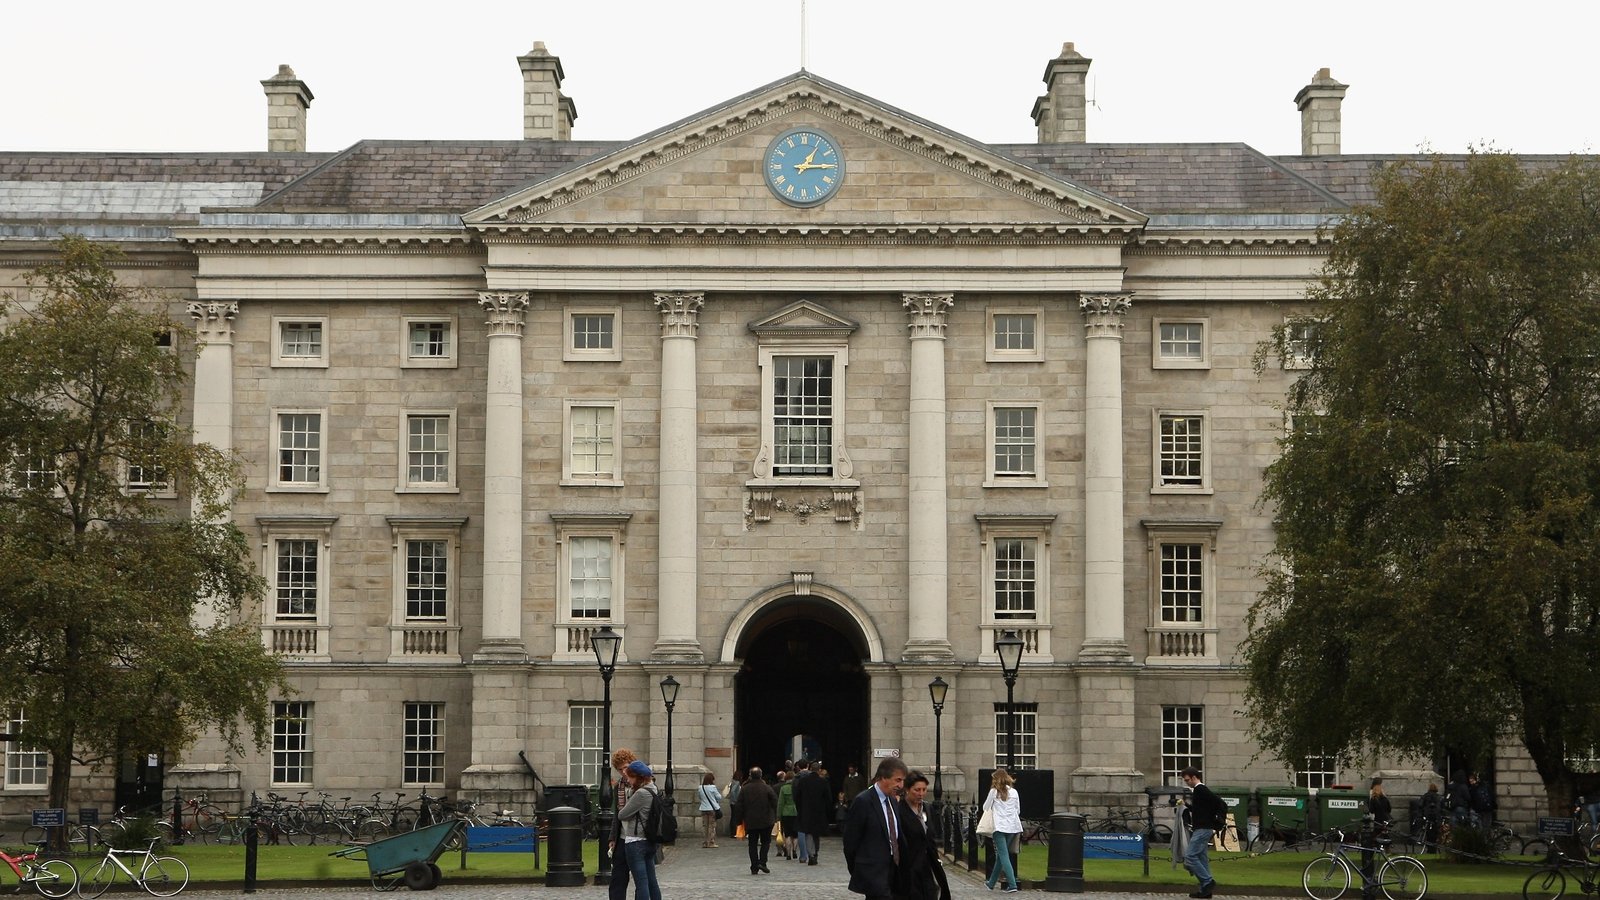 Image - Trinity College Dublin. The college was the largest landholder in Ireland at the time of the Famine and responsible for the evictions of many hundreds of people.